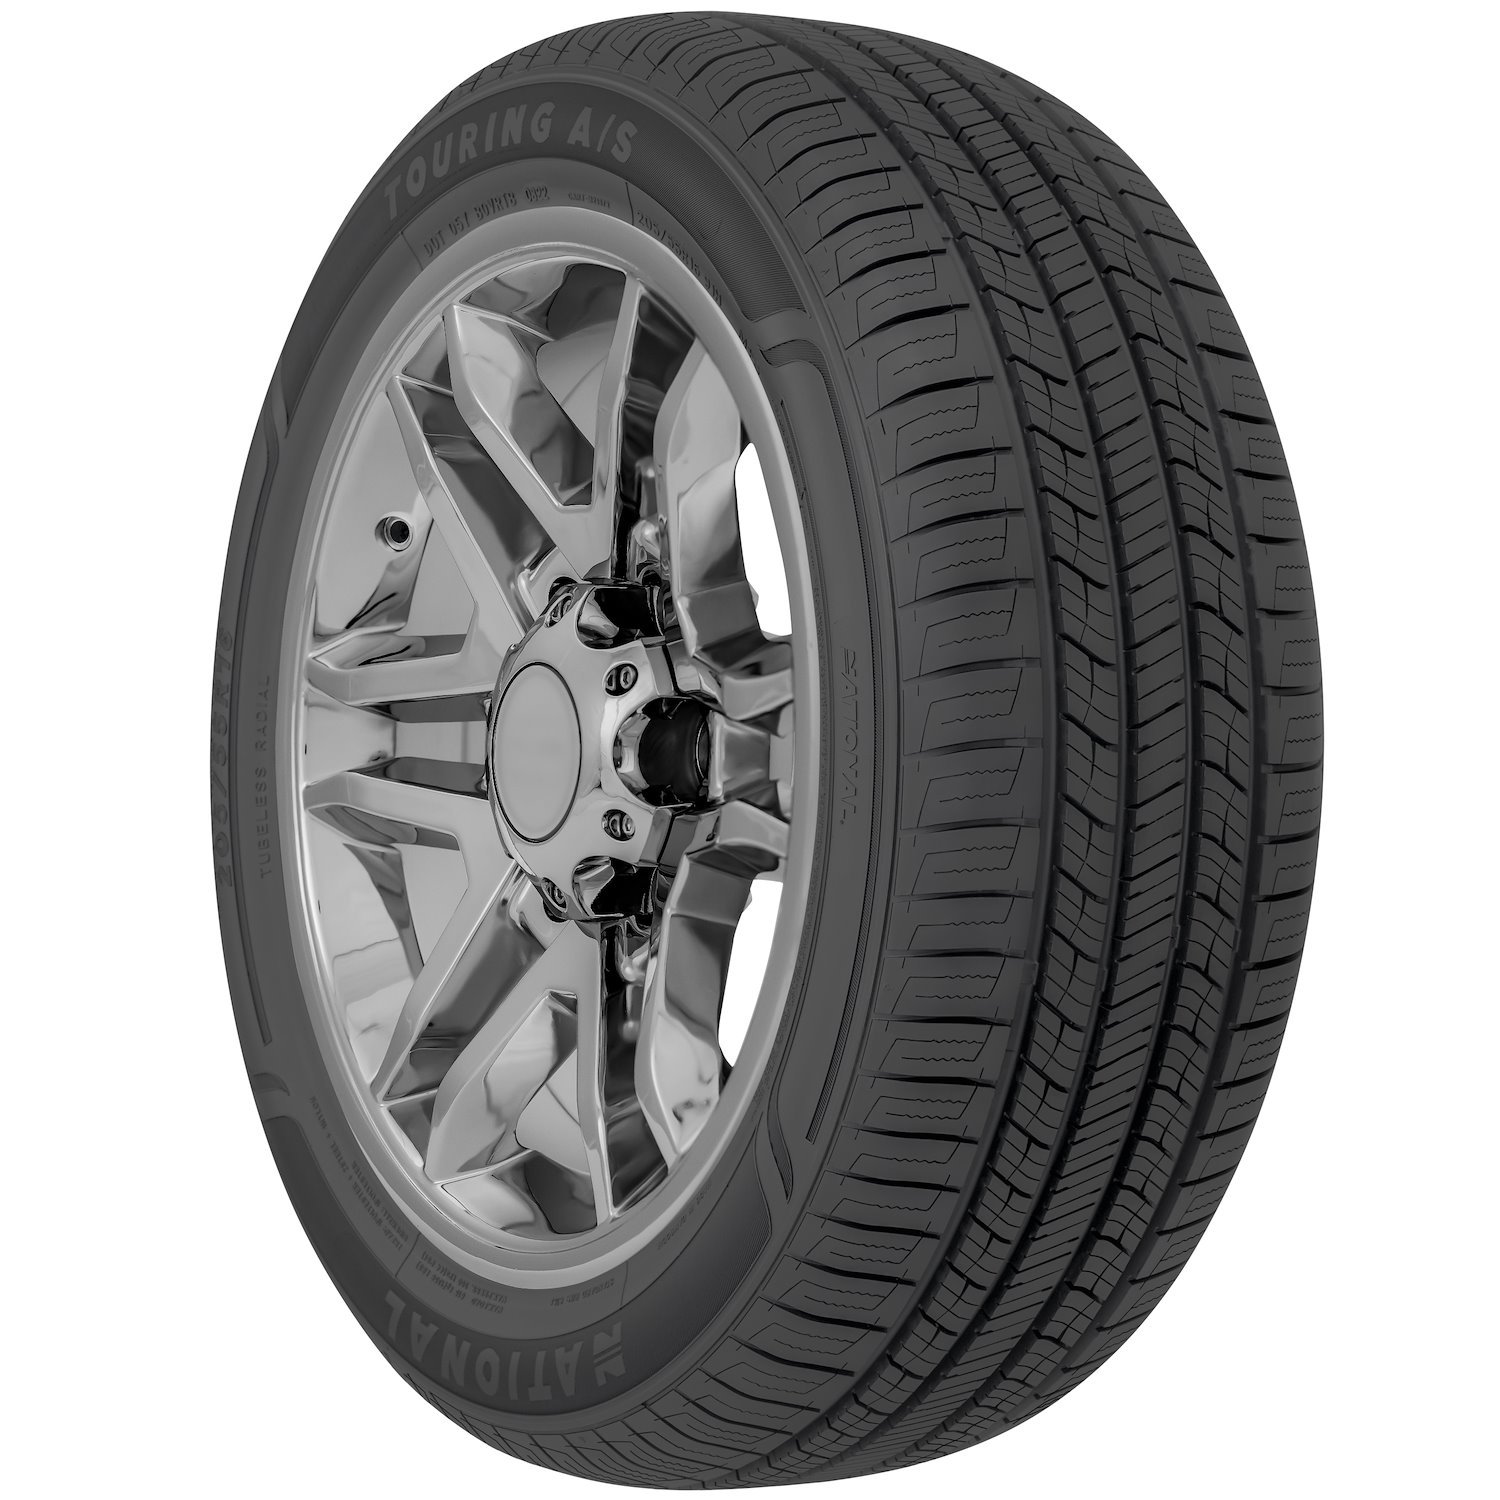 NLR56 Touring A/S Tire, 225/60R17